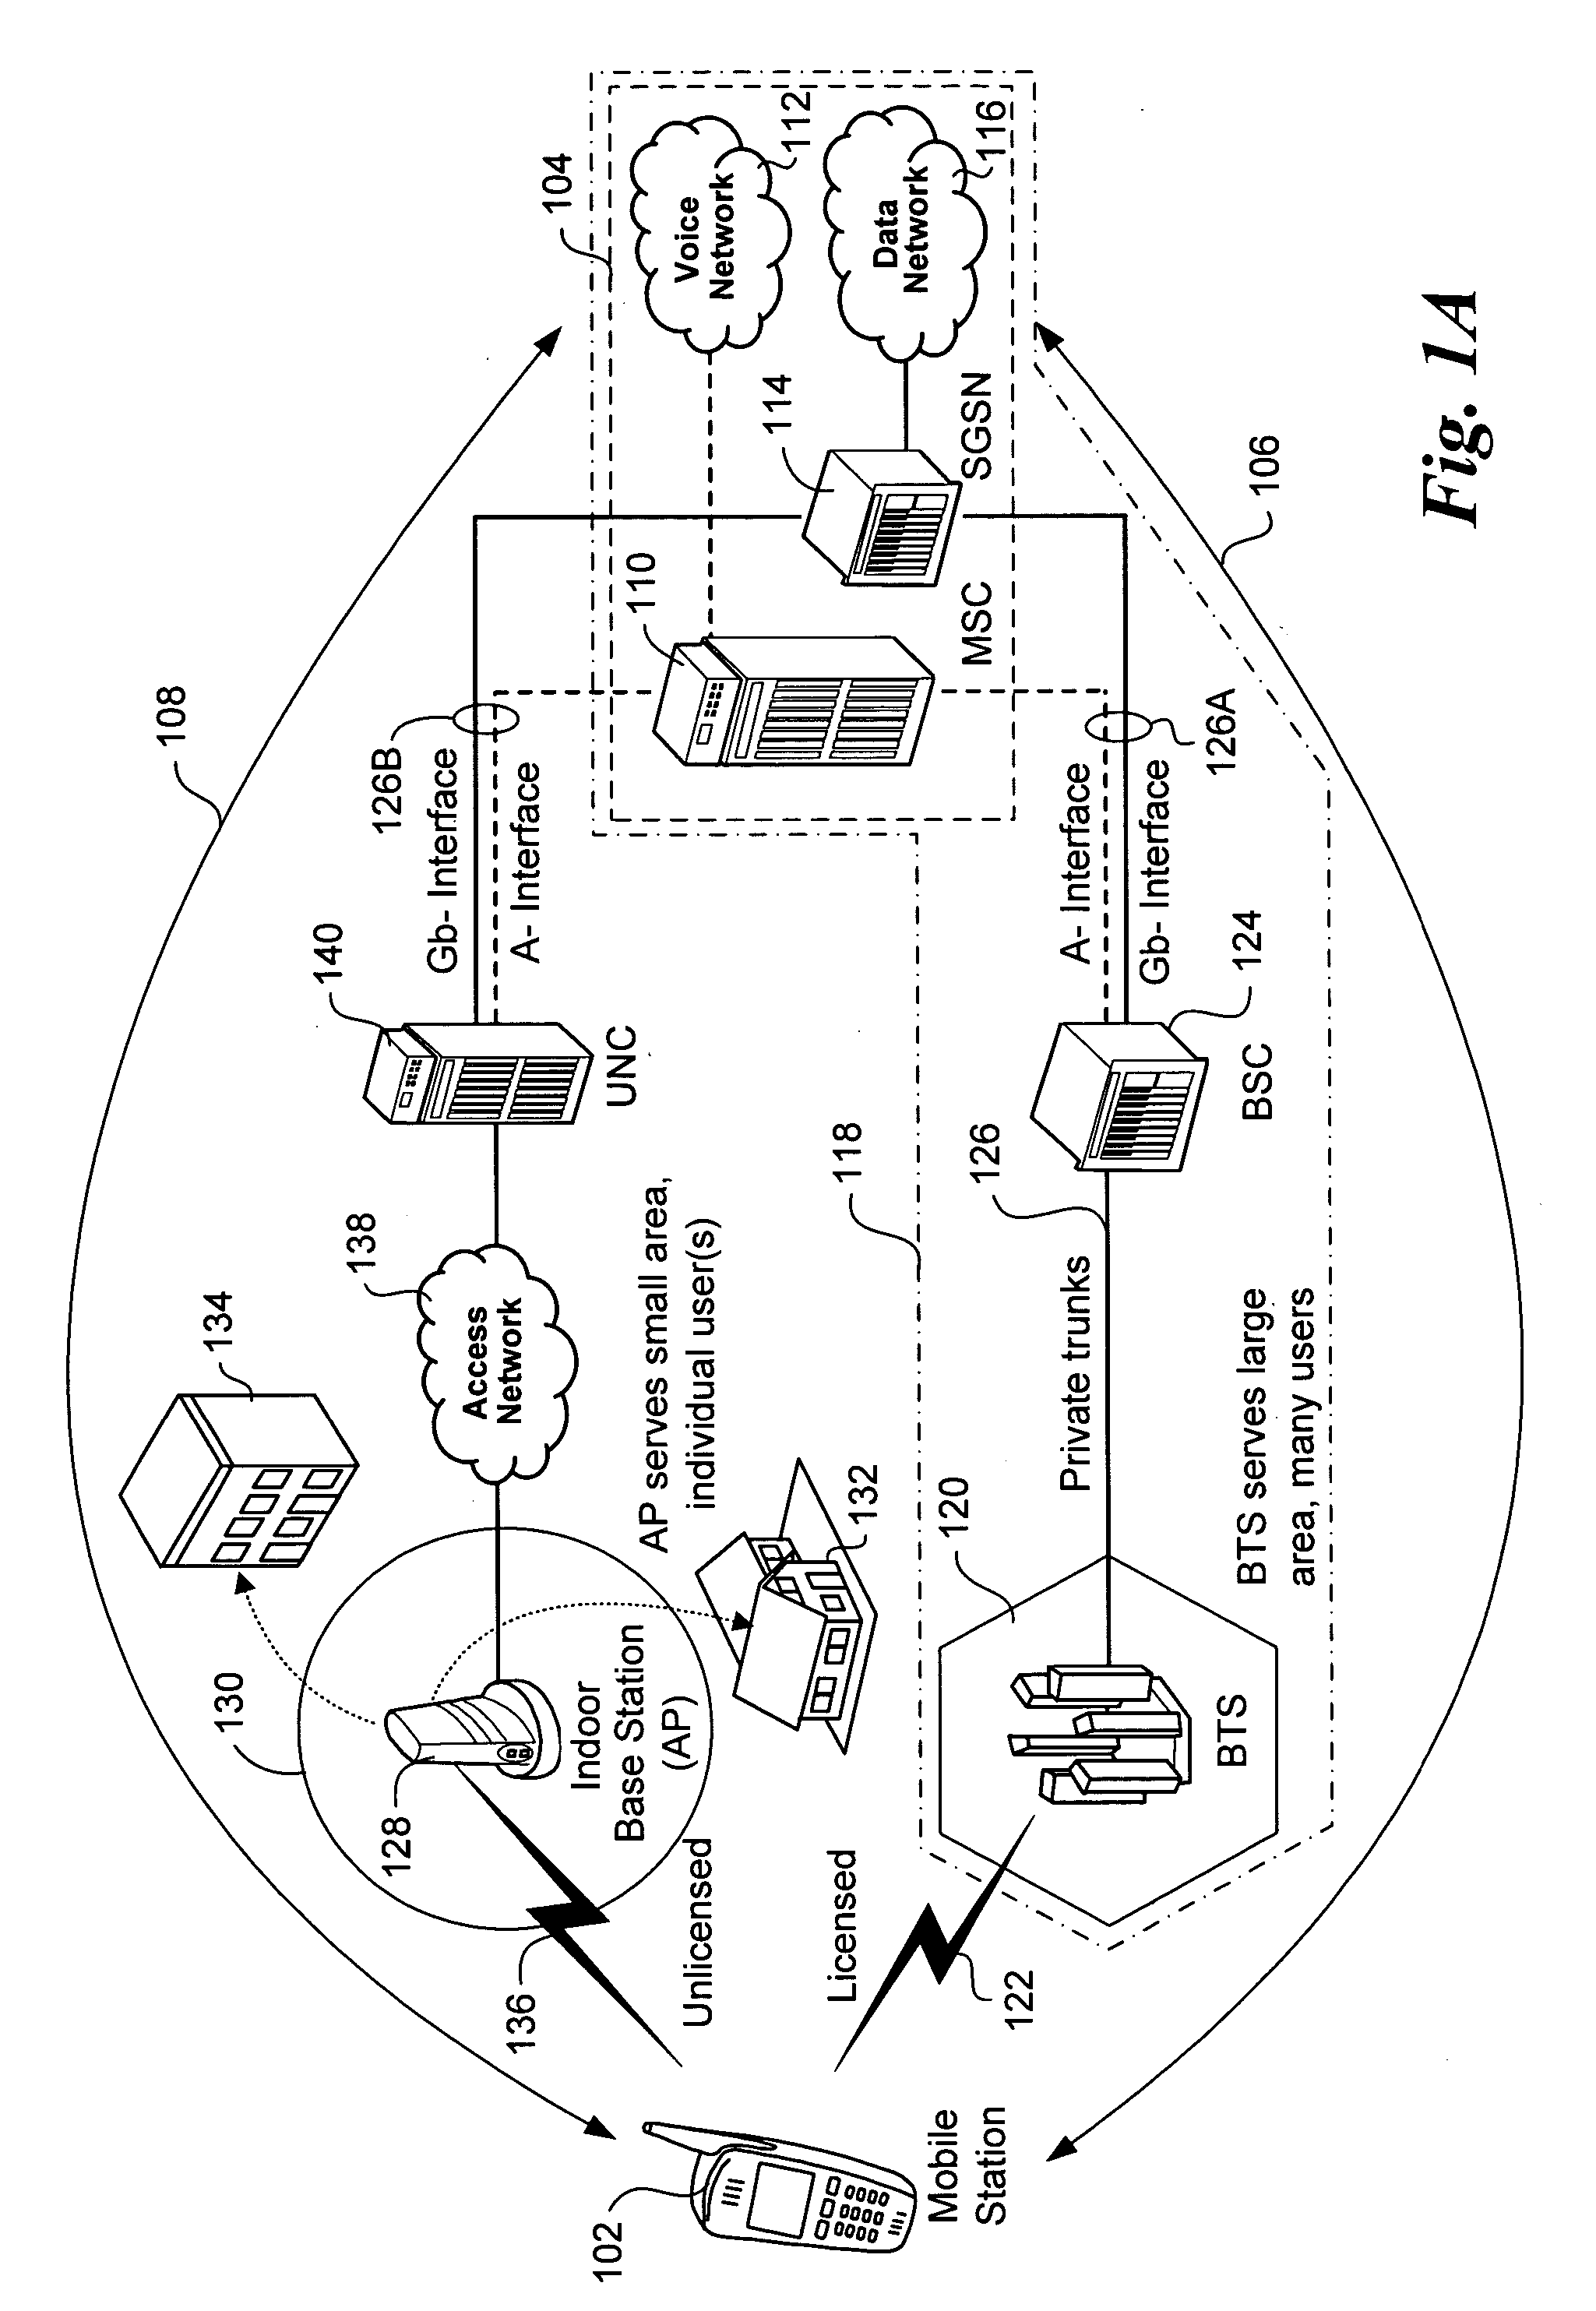 Registration messaging in an unlicensed mobile access telecommunications system